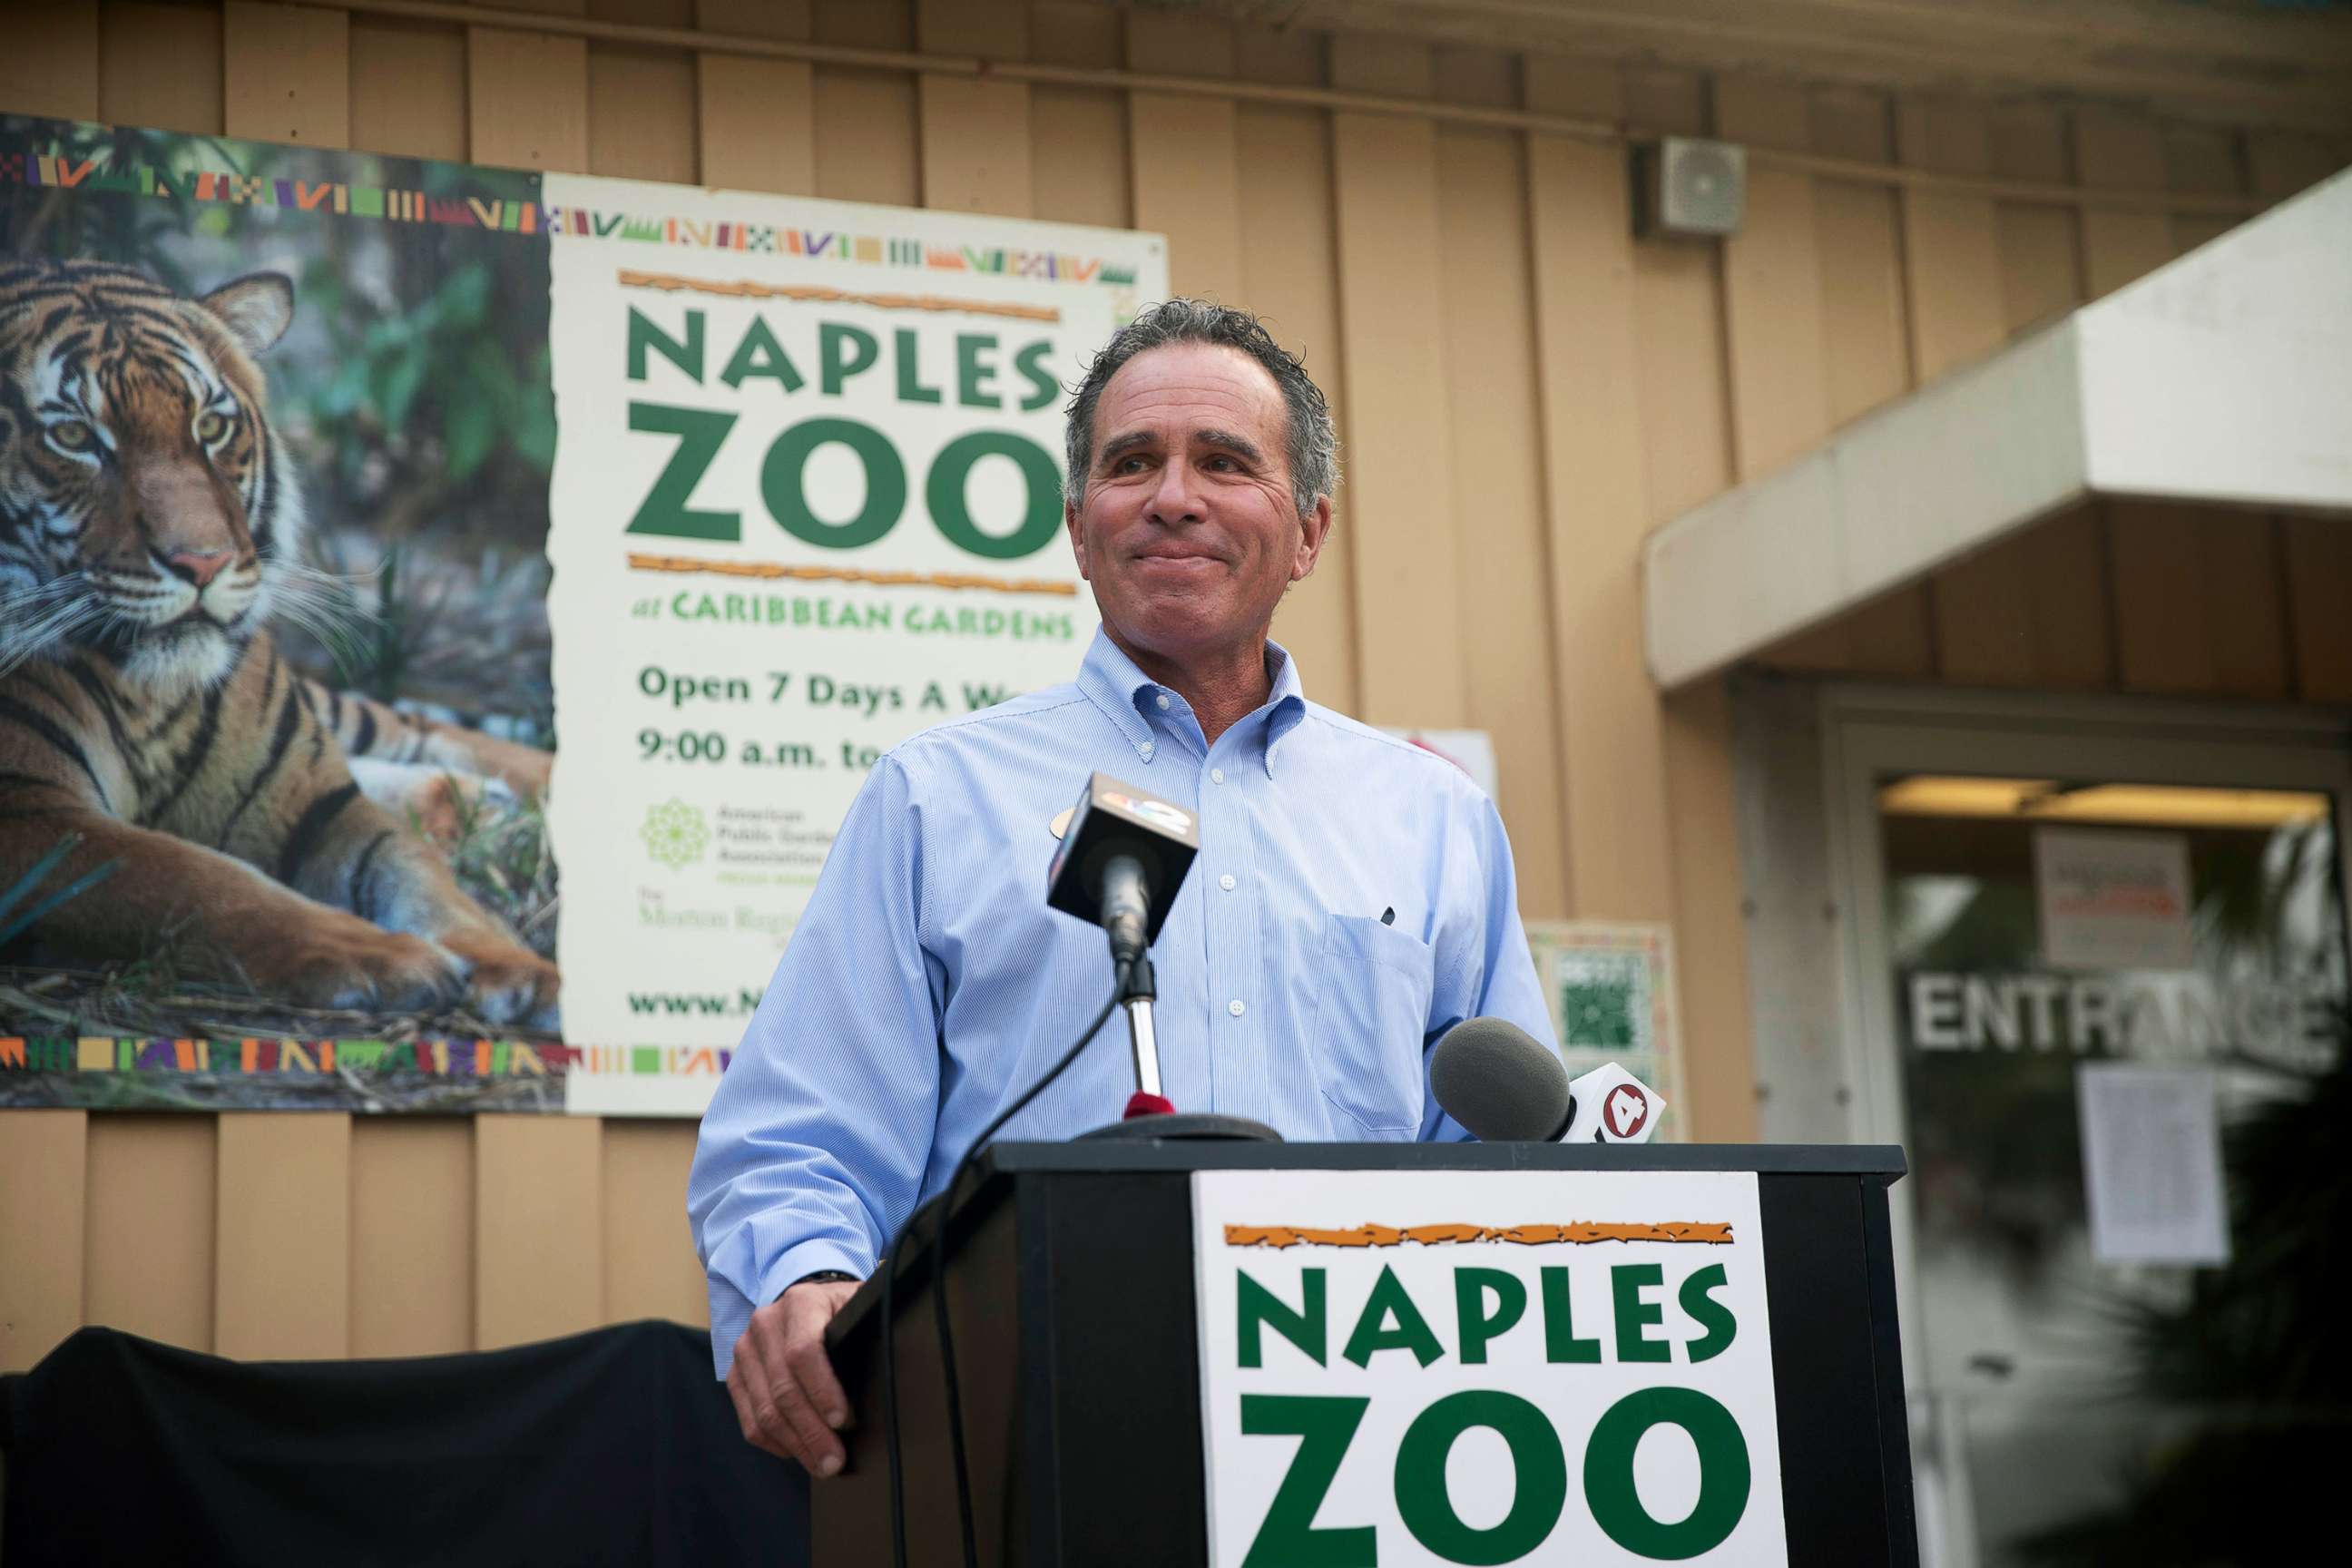 PHOTO: Naples Zoo at Caribbean Gardens President and CEO Jack Mulvena speaks during a press conference, Dec. 31, 2021, about the shooting death of Eko the tiger at the zoo.